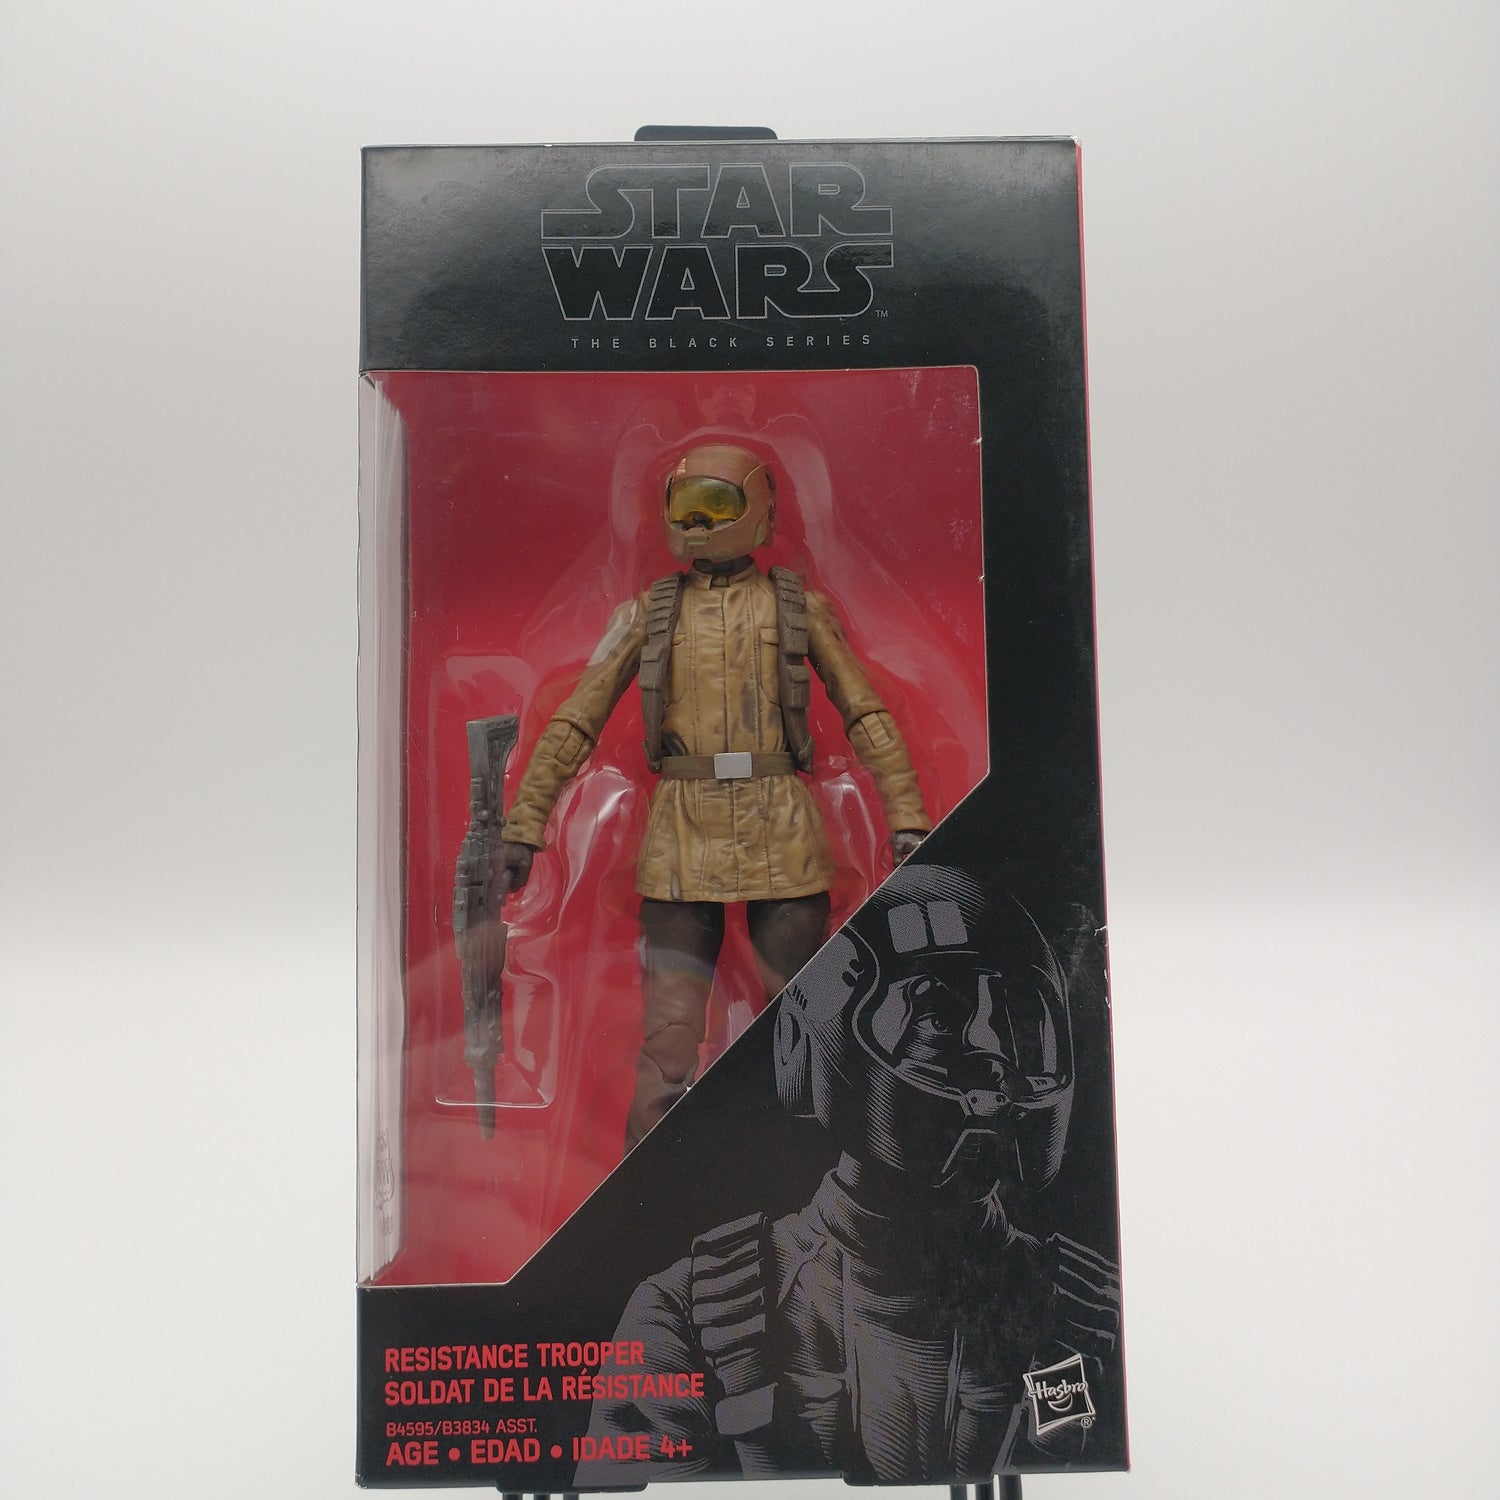 The front of the box and bubble. The bubble is sealed and the action figure inside is wearing a tan overcoat, a harness, a helmet, and holding a gun.